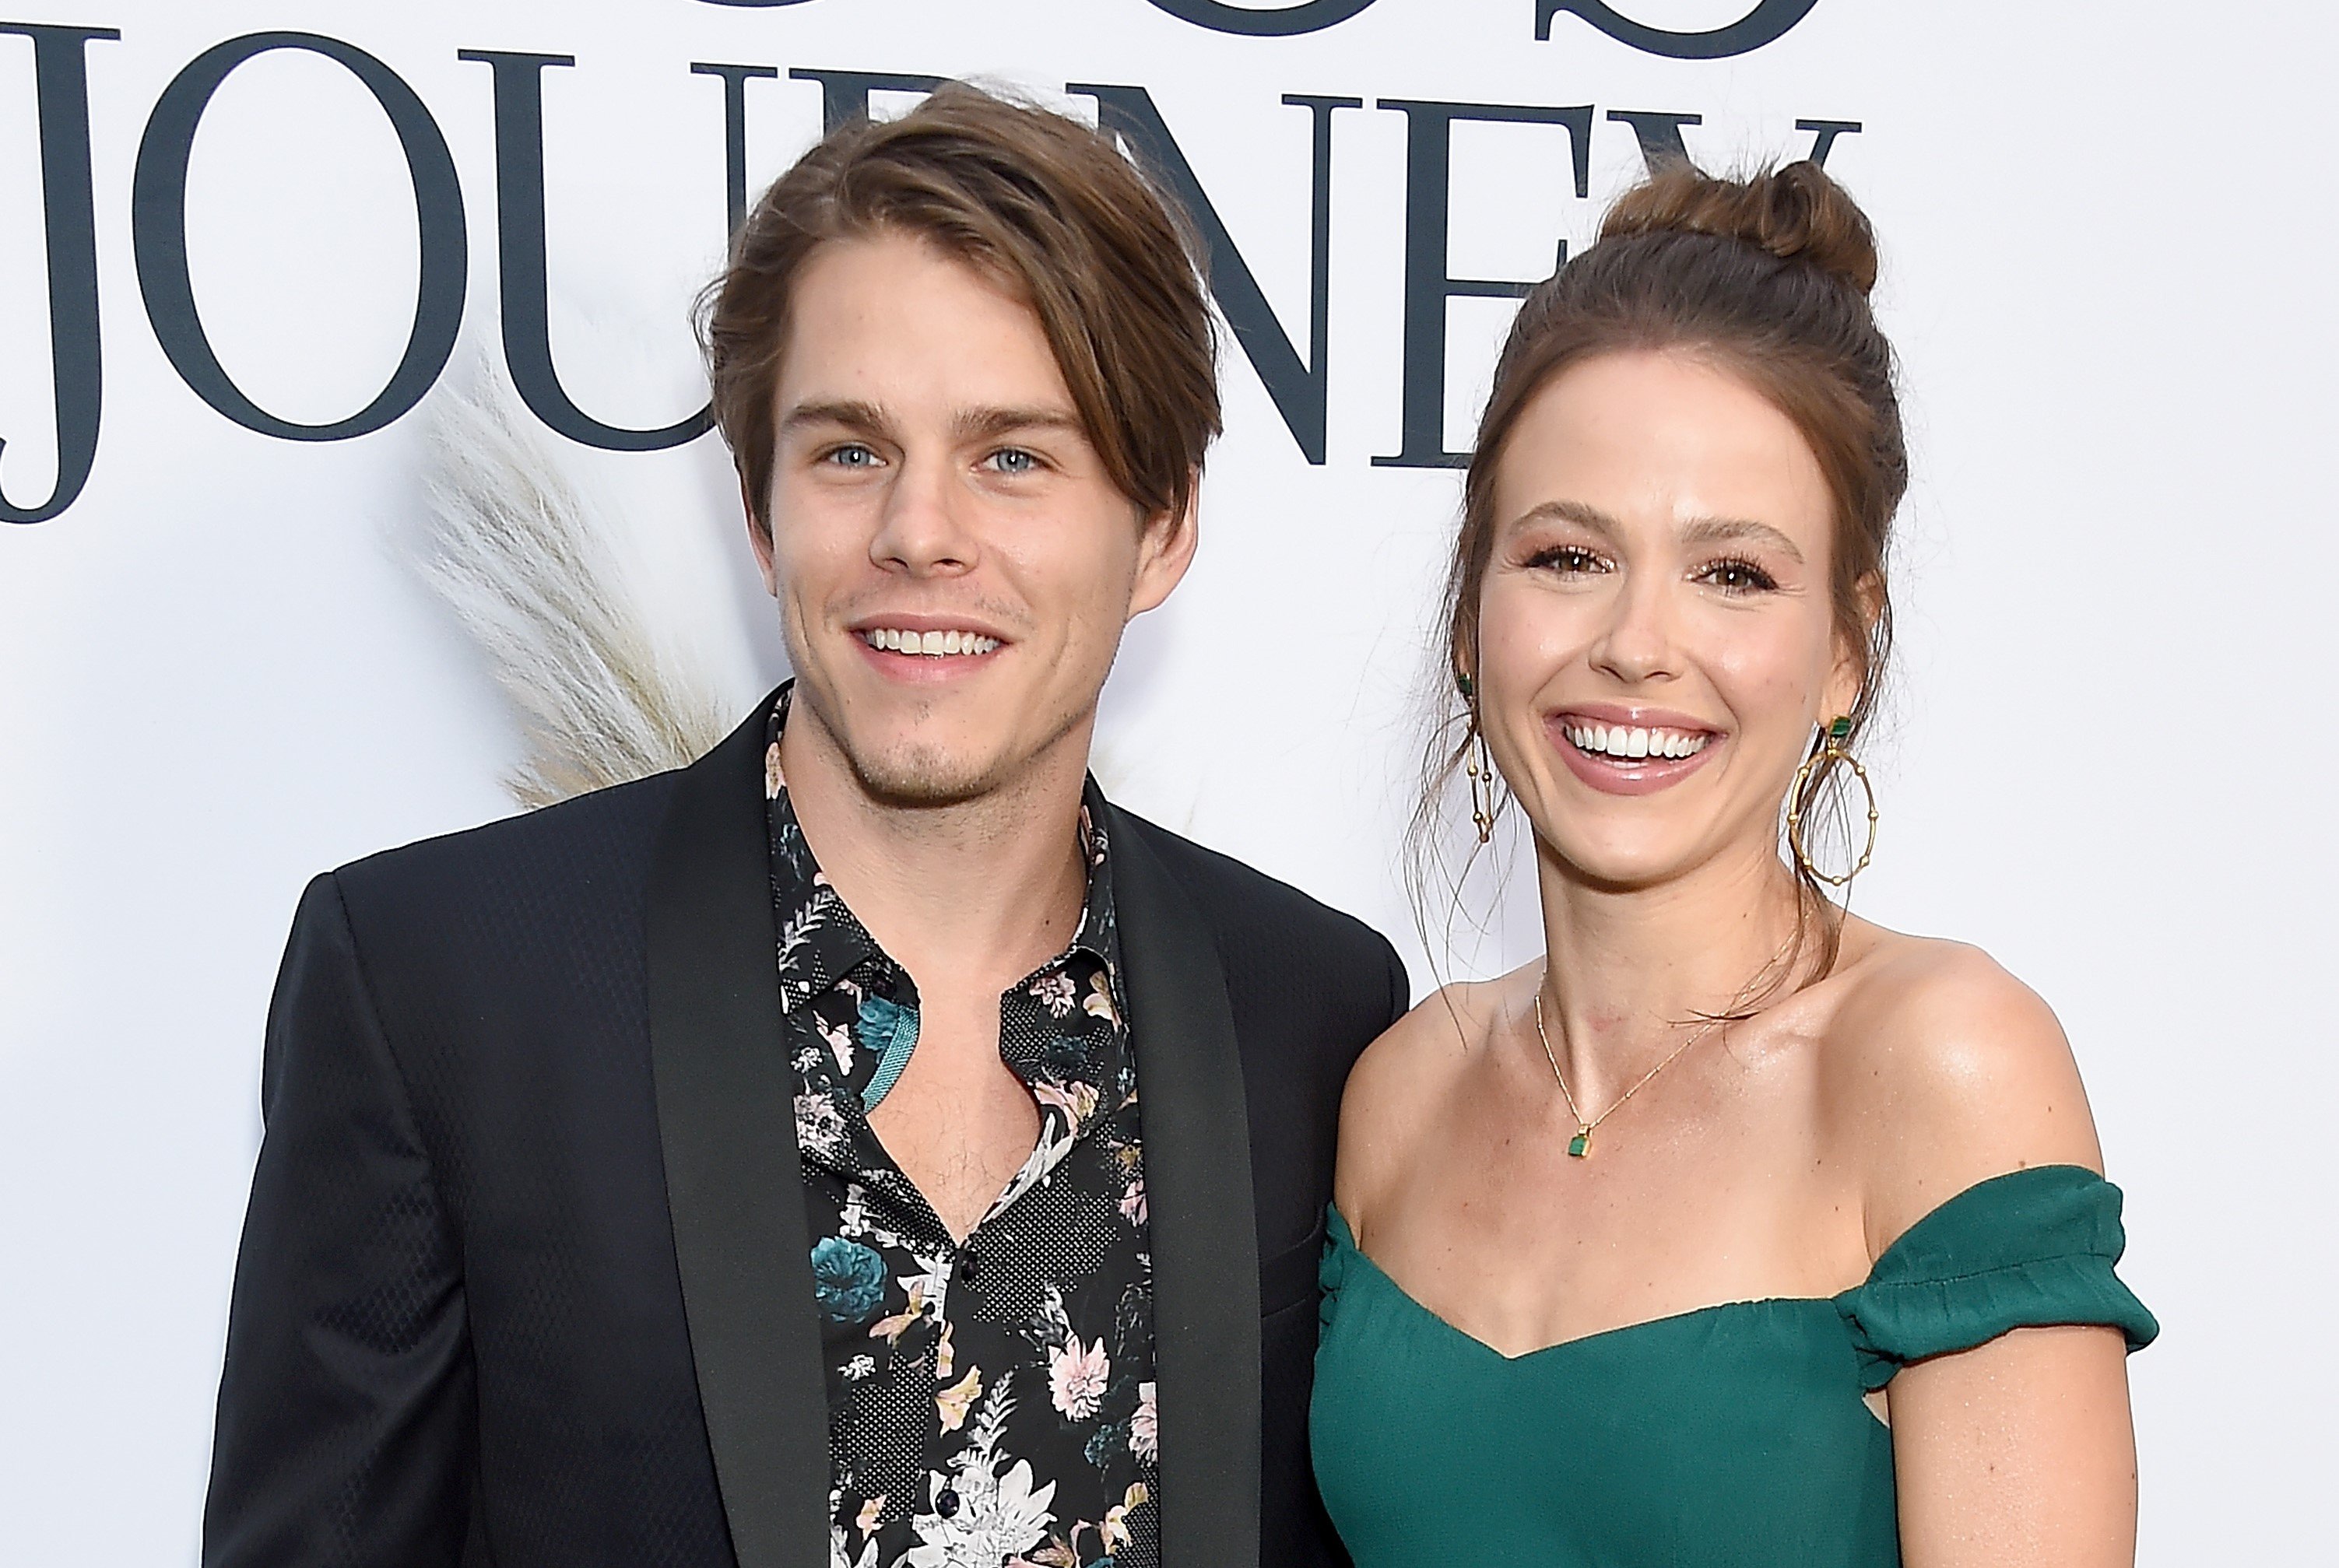 Jake Manley and Jocelyn Hudon arrive at the premiere of "A Dog's Journey" at ArcLight Hollywood, on May 9, 2019, in Hollywood, California. | Source: Getty Images